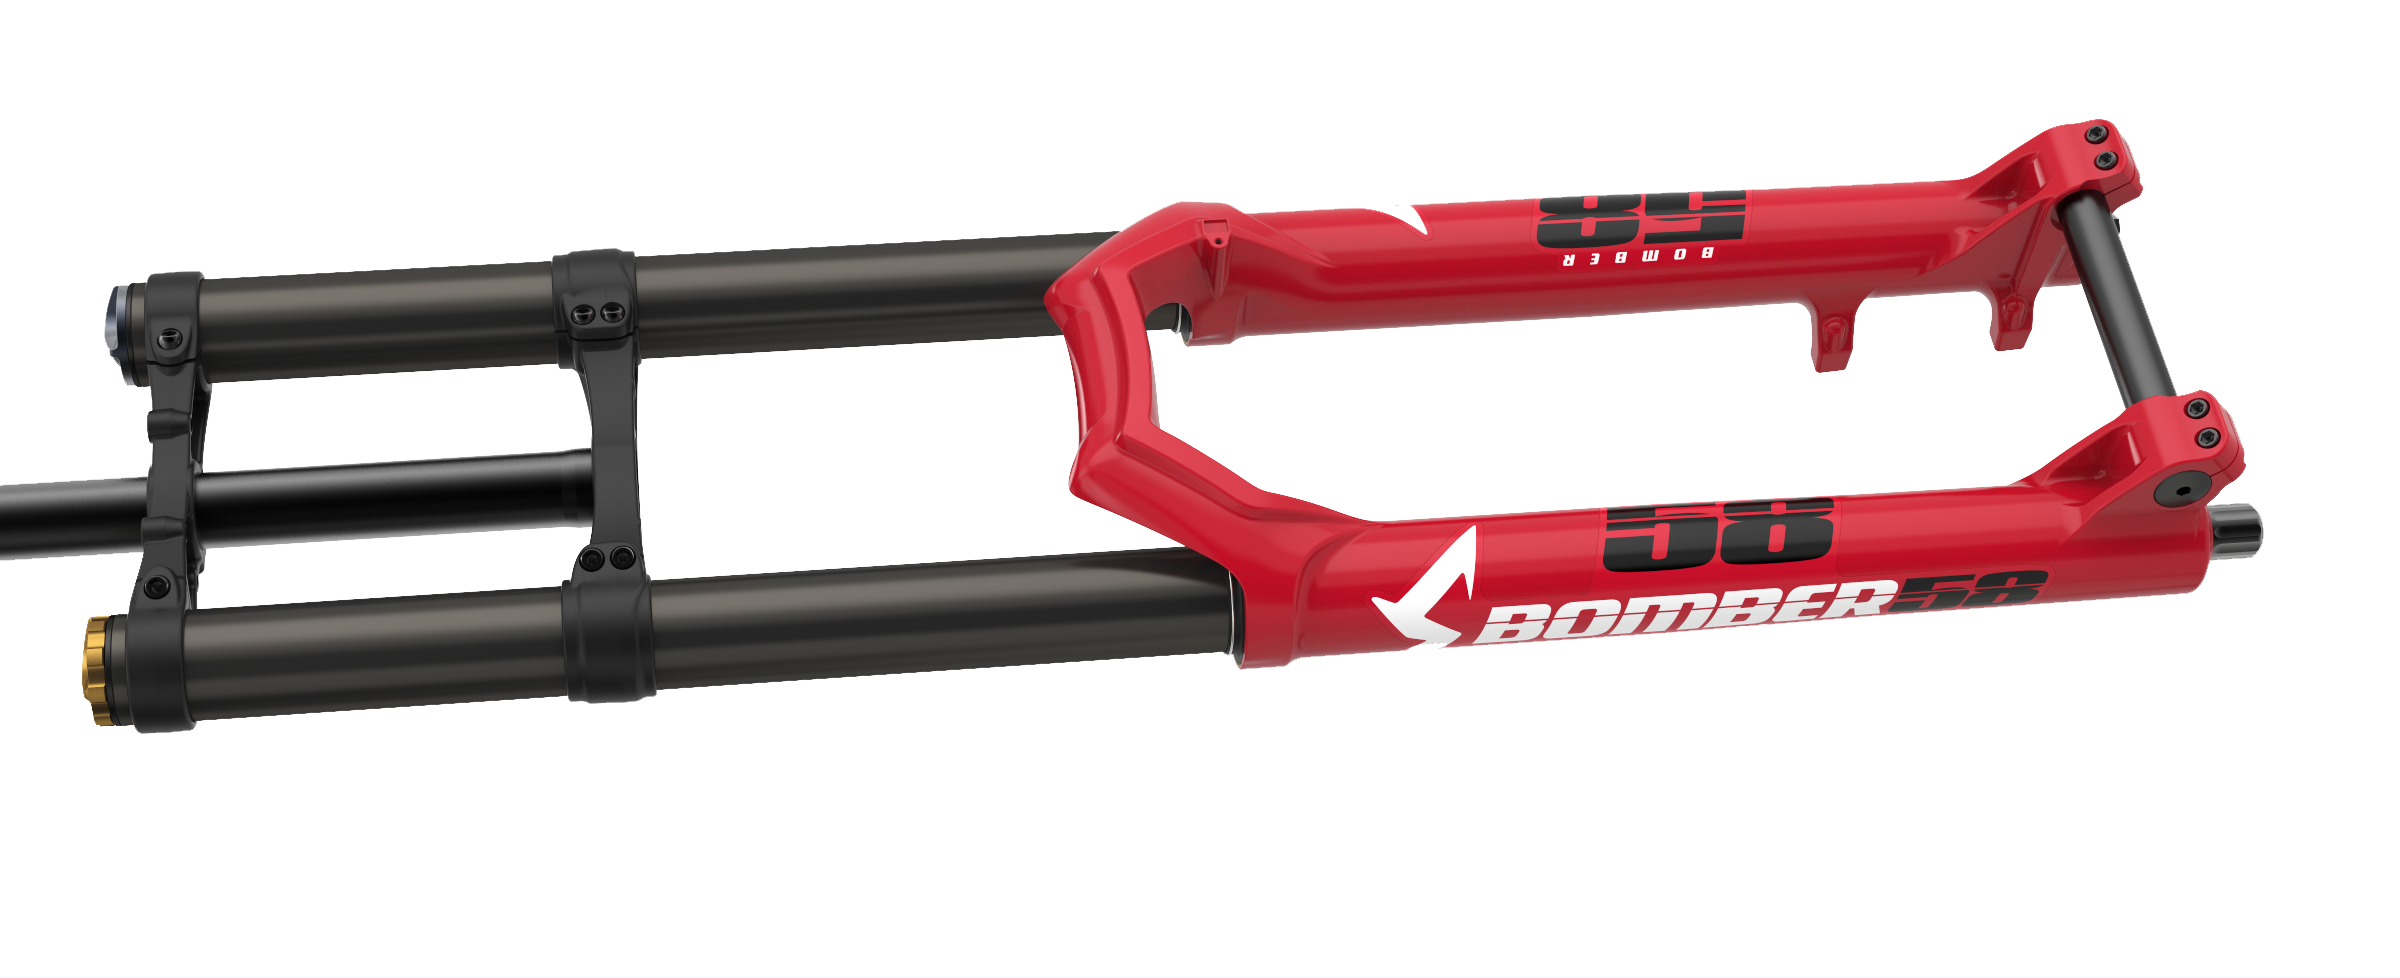 Marzocchi returns with Bomber Z1, Bomber 58 suspension forks featuring Fox tech